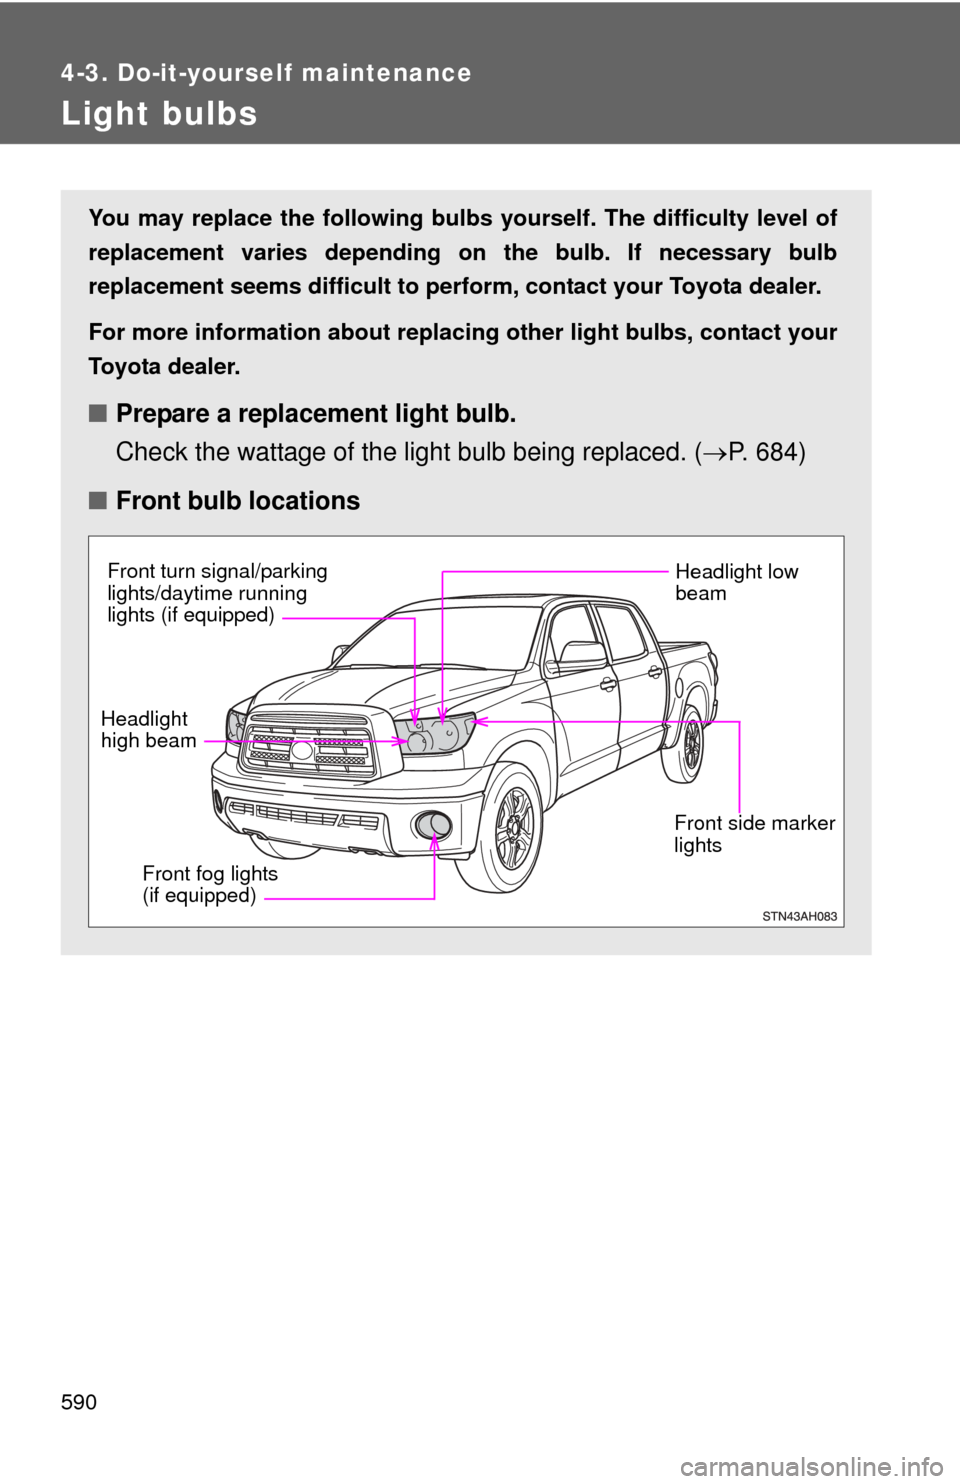 TOYOTA TUNDRA 2013 2.G Owners Manual 590
4-3. Do-it-yourself maintenance
Light bulbs
You may replace the following bulbs yourself. The difficulty level of
replacement varies depending on the bulb. If necessary bulb
replacement seems diff